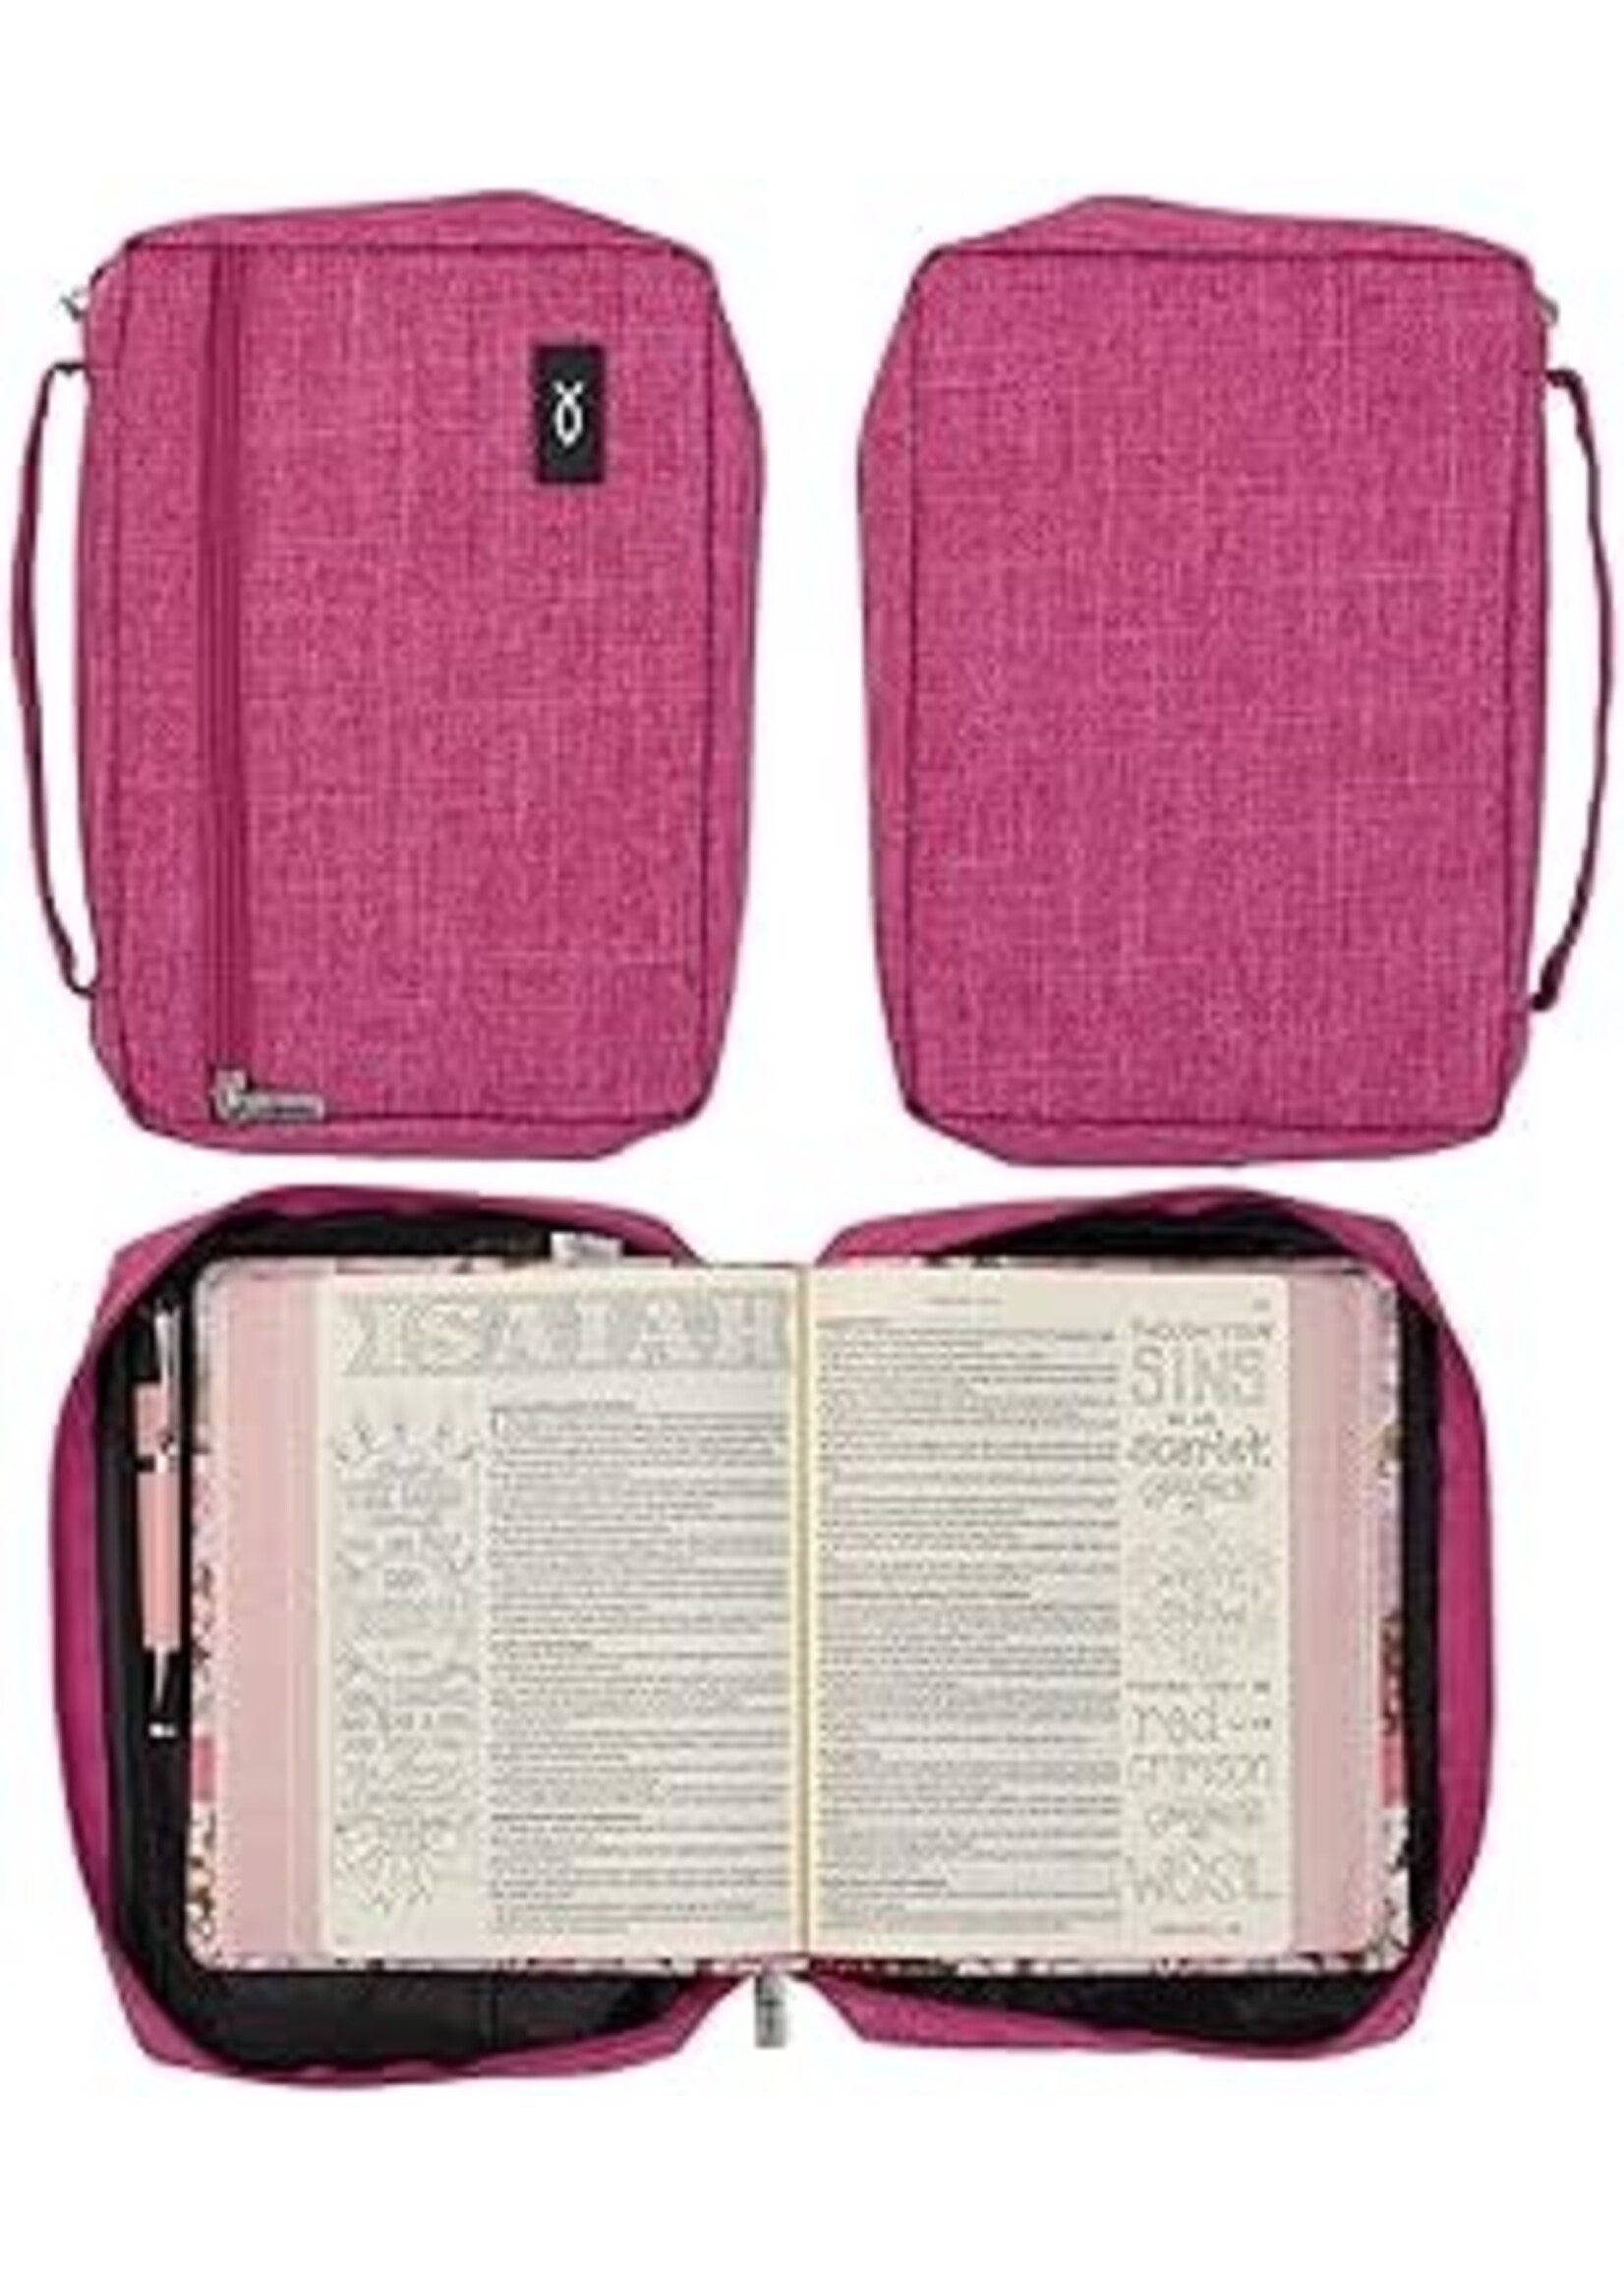 Bible Cover Pink Lg